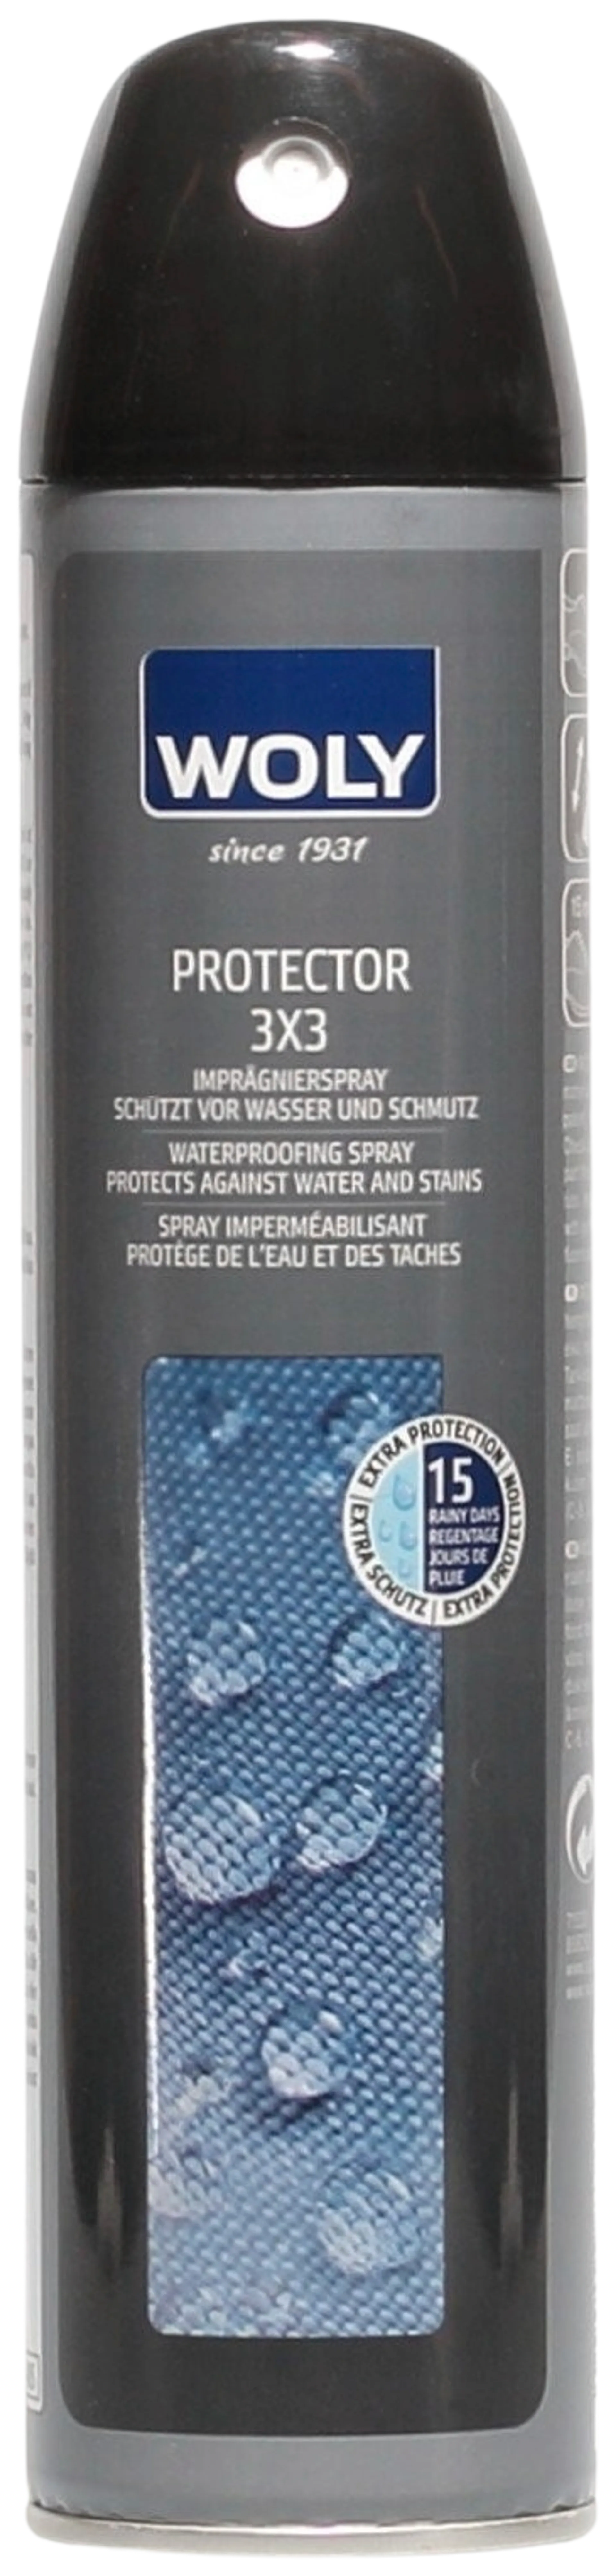 Woly Protector 3x3 300ml